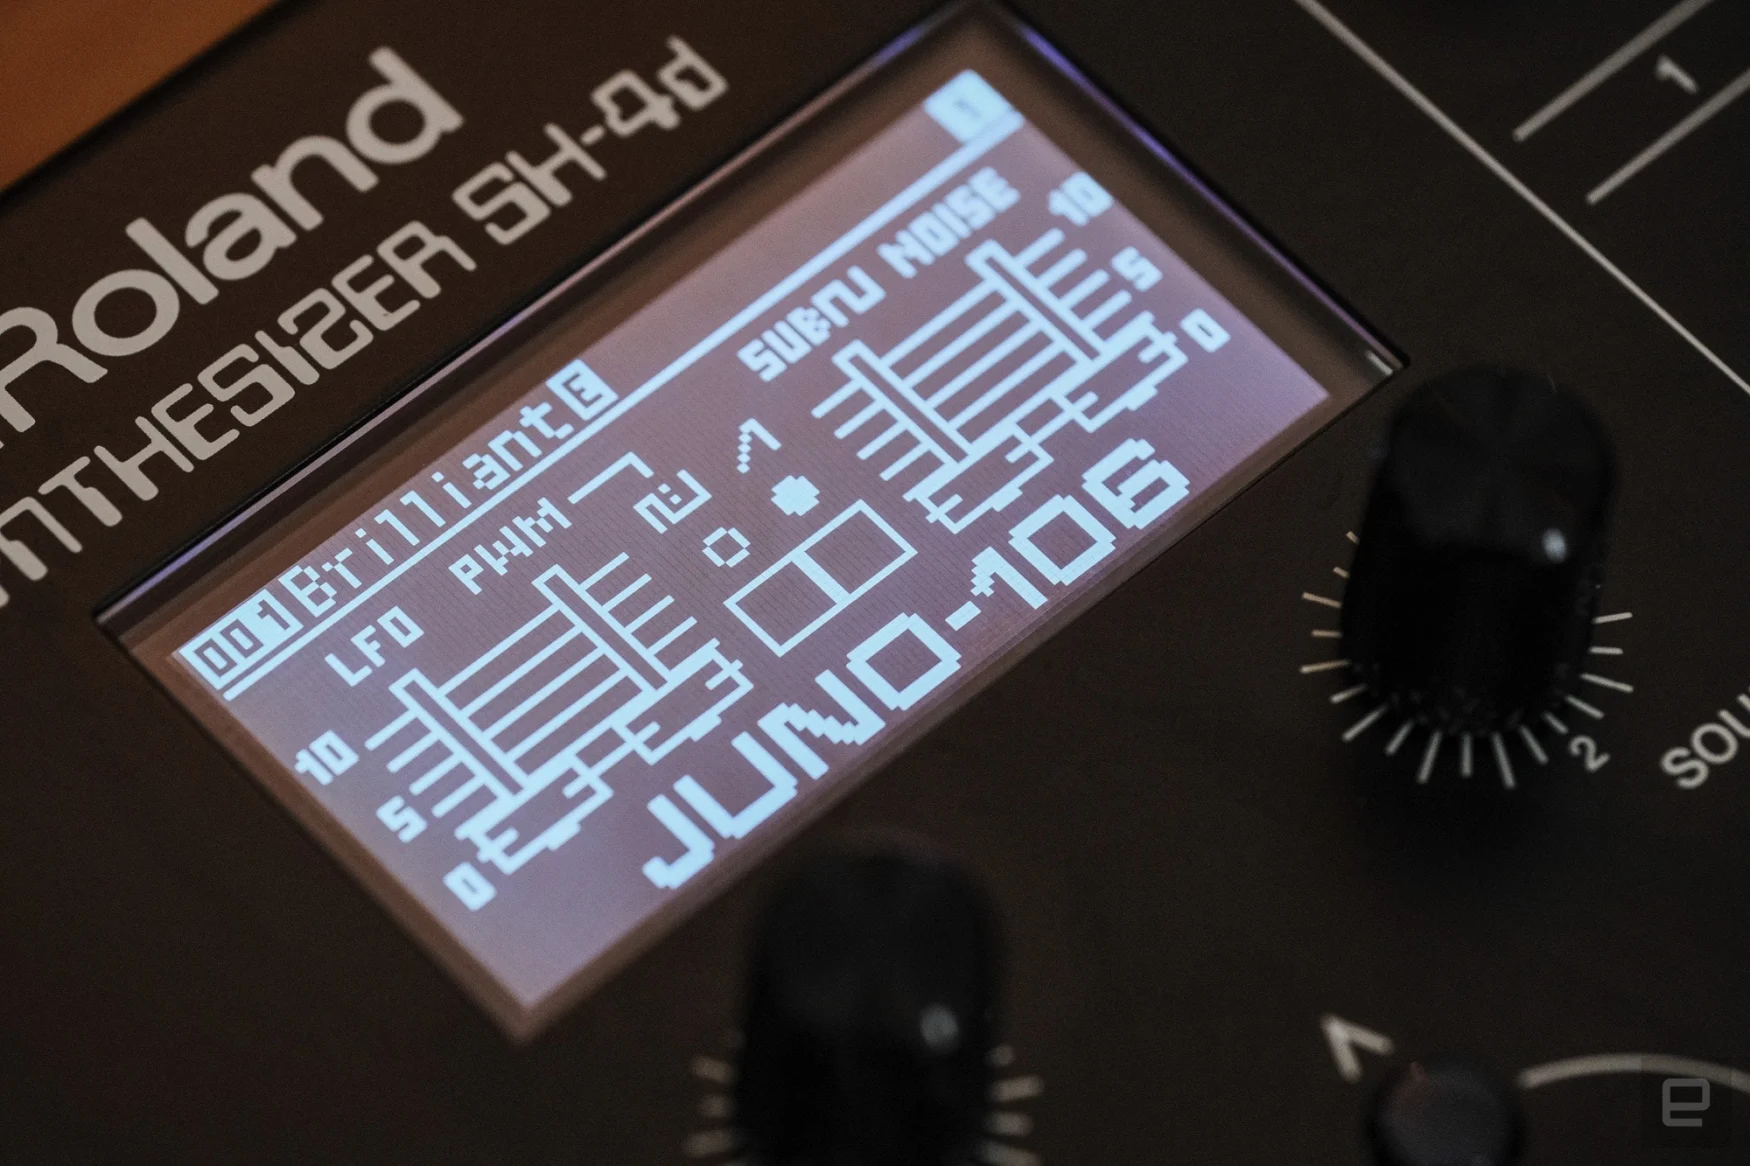 Juno-106 graphics on the Roland SH-4d.